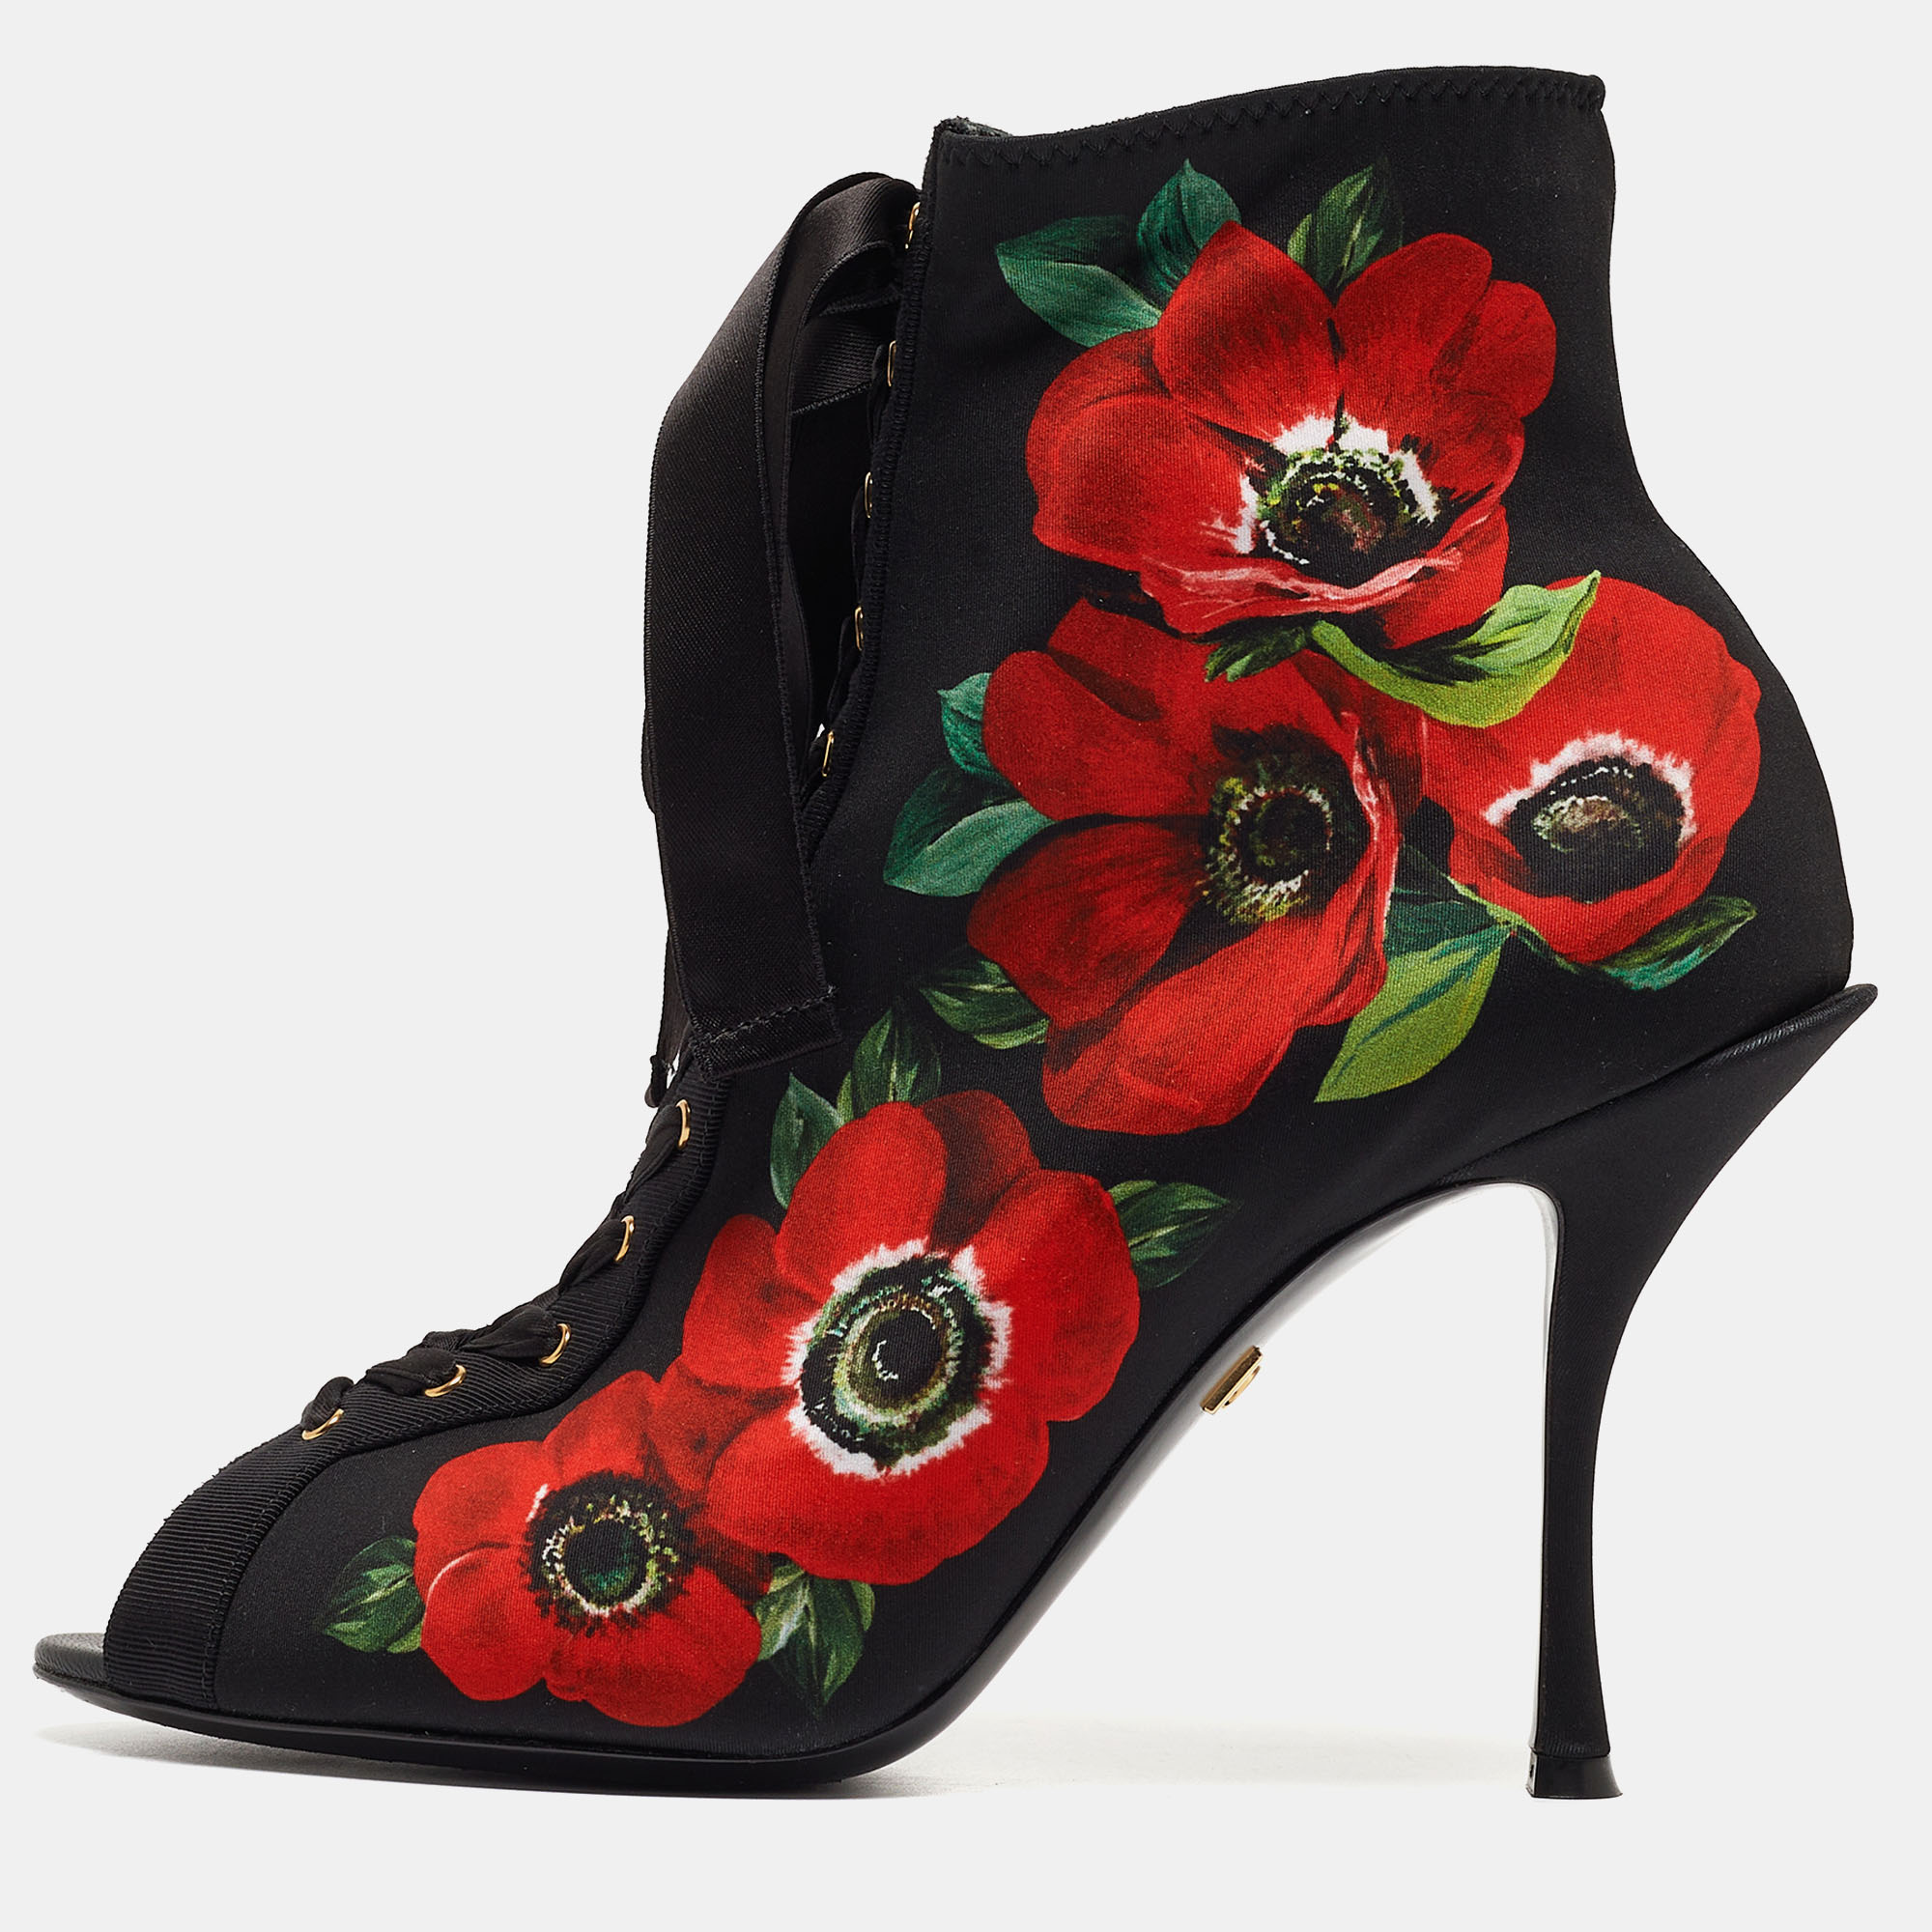 Pre-owned Dolce & Gabbana Black/red Floral Print Stretch Fabric Peep Toe Ankle Booties Size 39